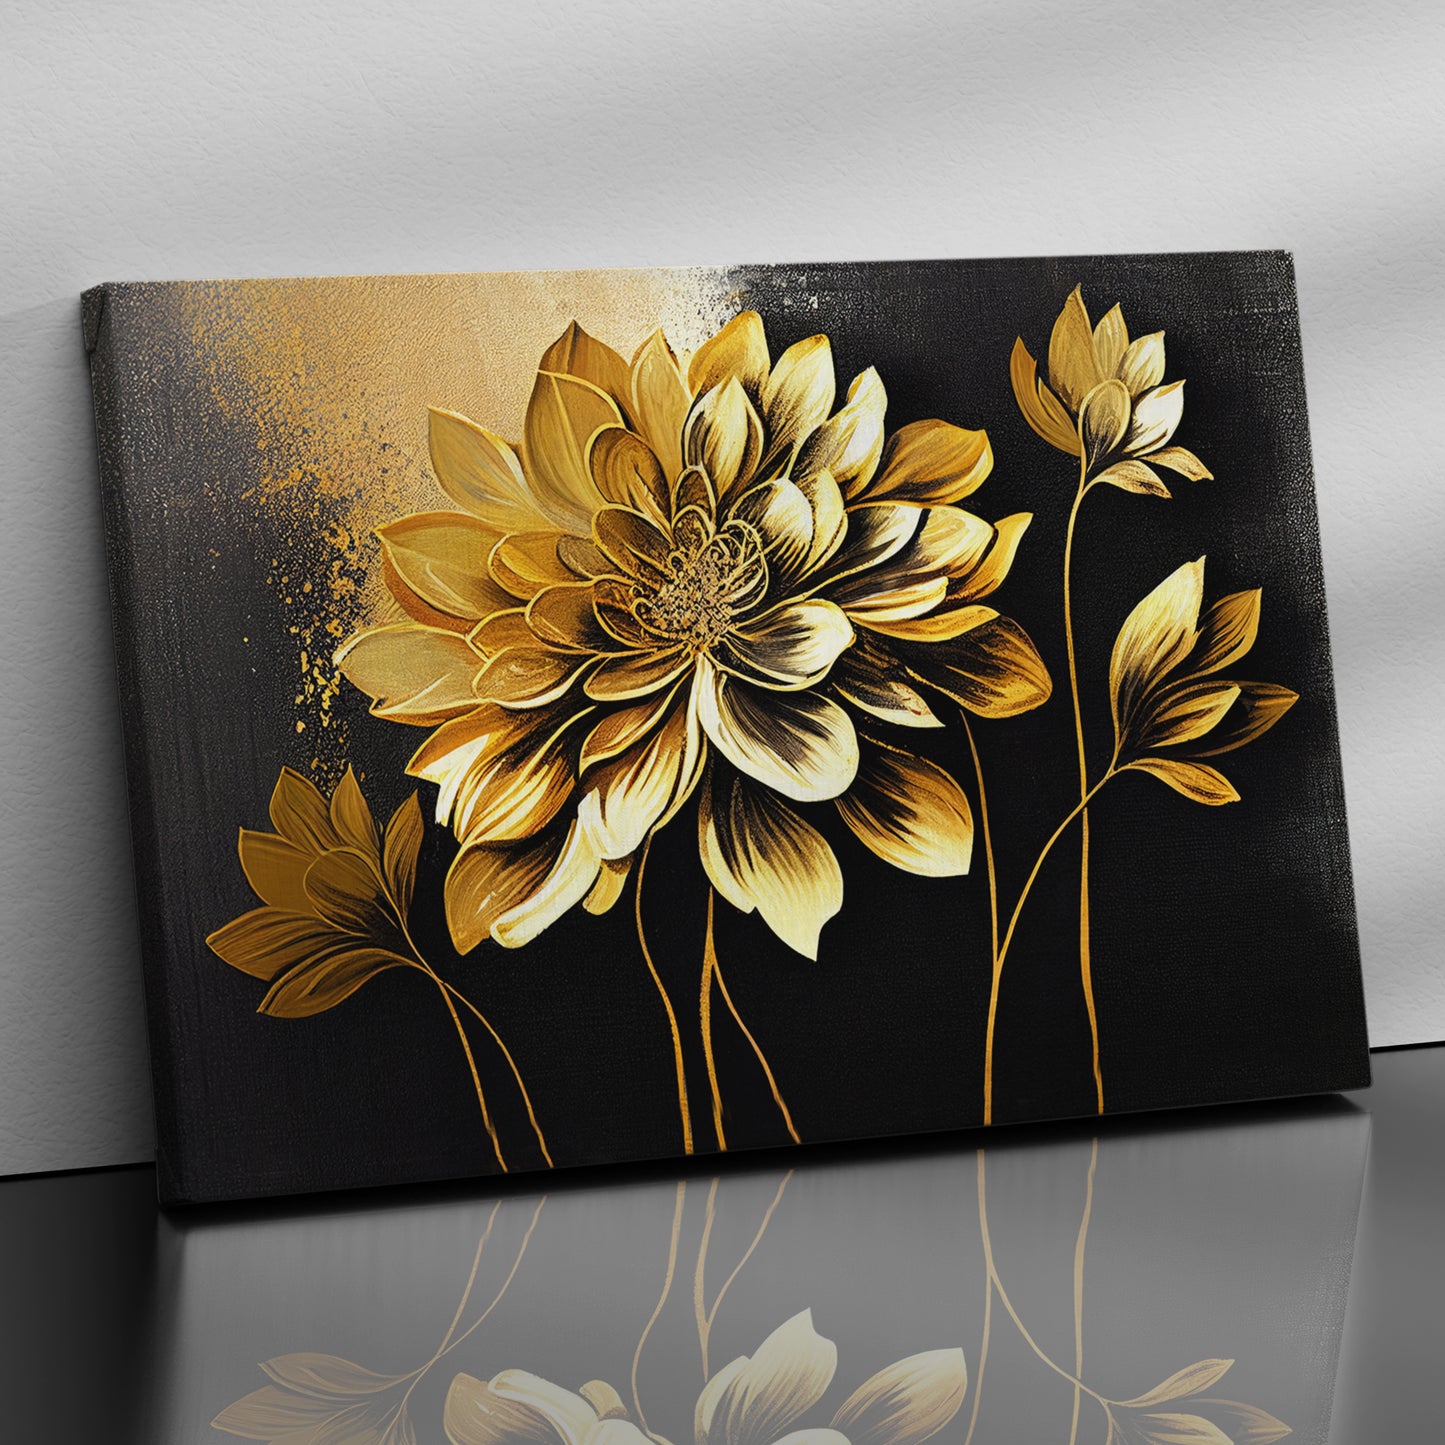 Golden Floral Art Painting for Wall Decor - Canvas Art for Living Room Bedroom Wall Decoration